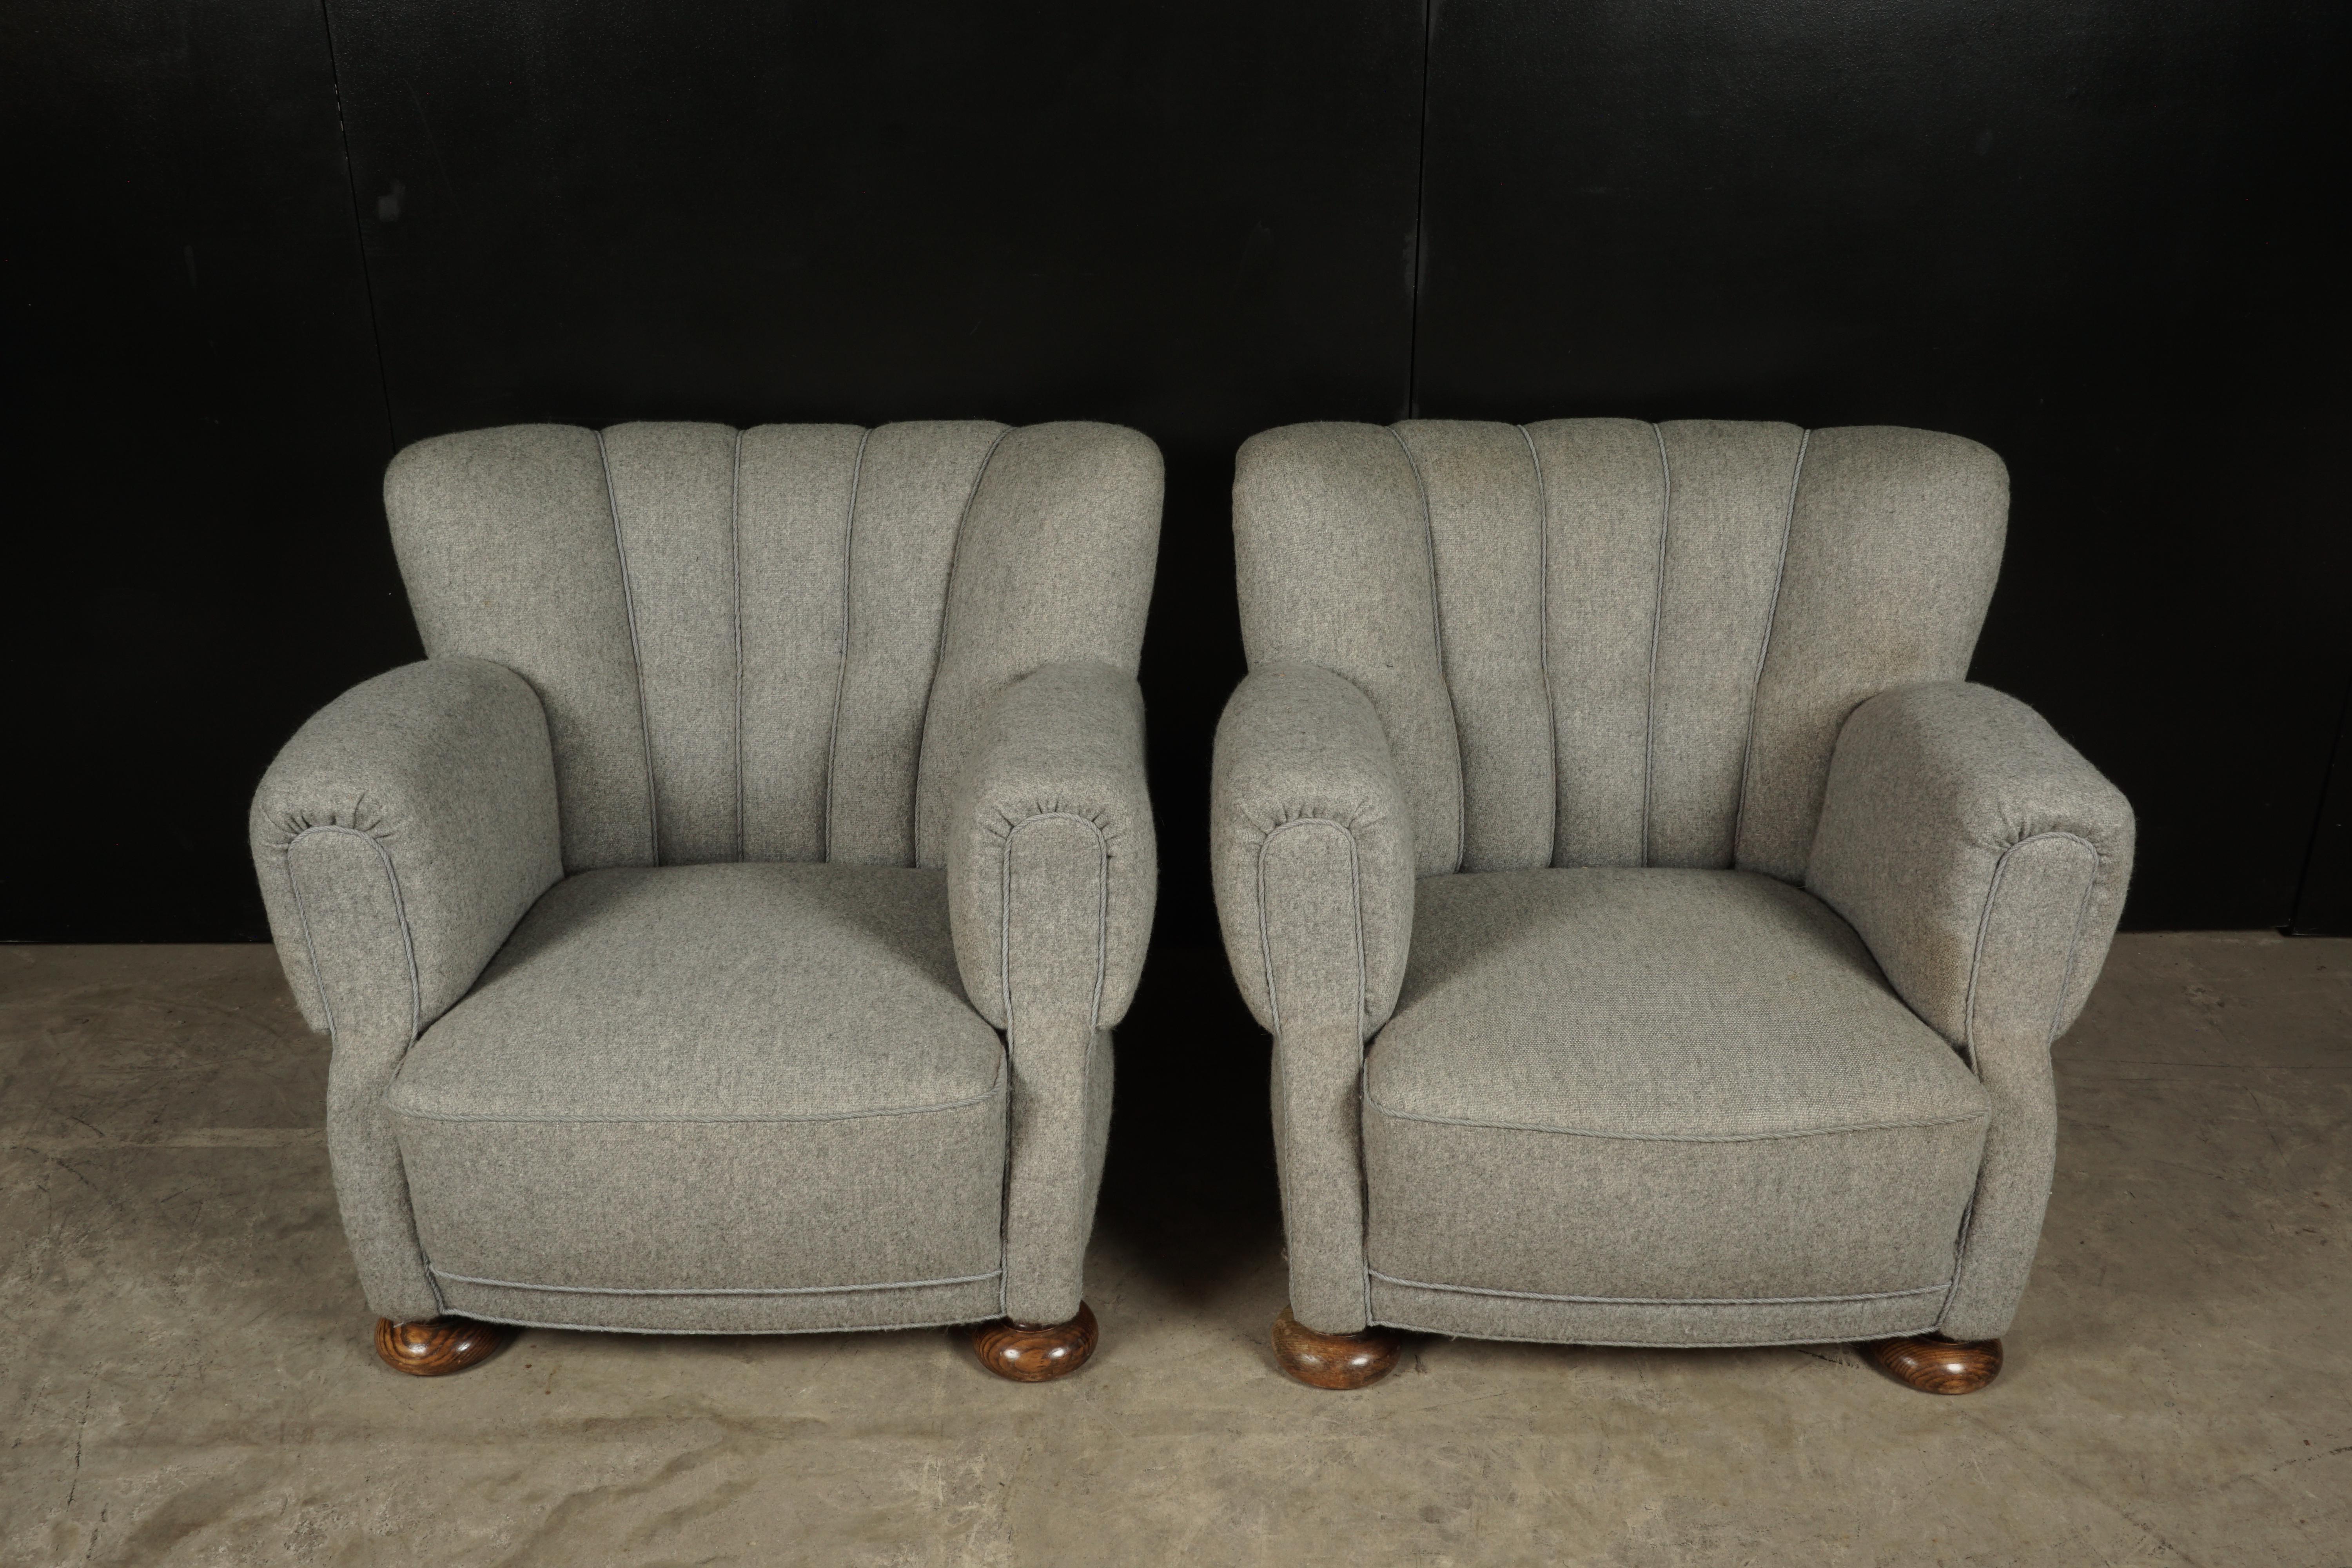 Midcentury pair of Art Deco lounge chairs from Denmark, circa 1950. Original light grey upholstery with round wooden feet.